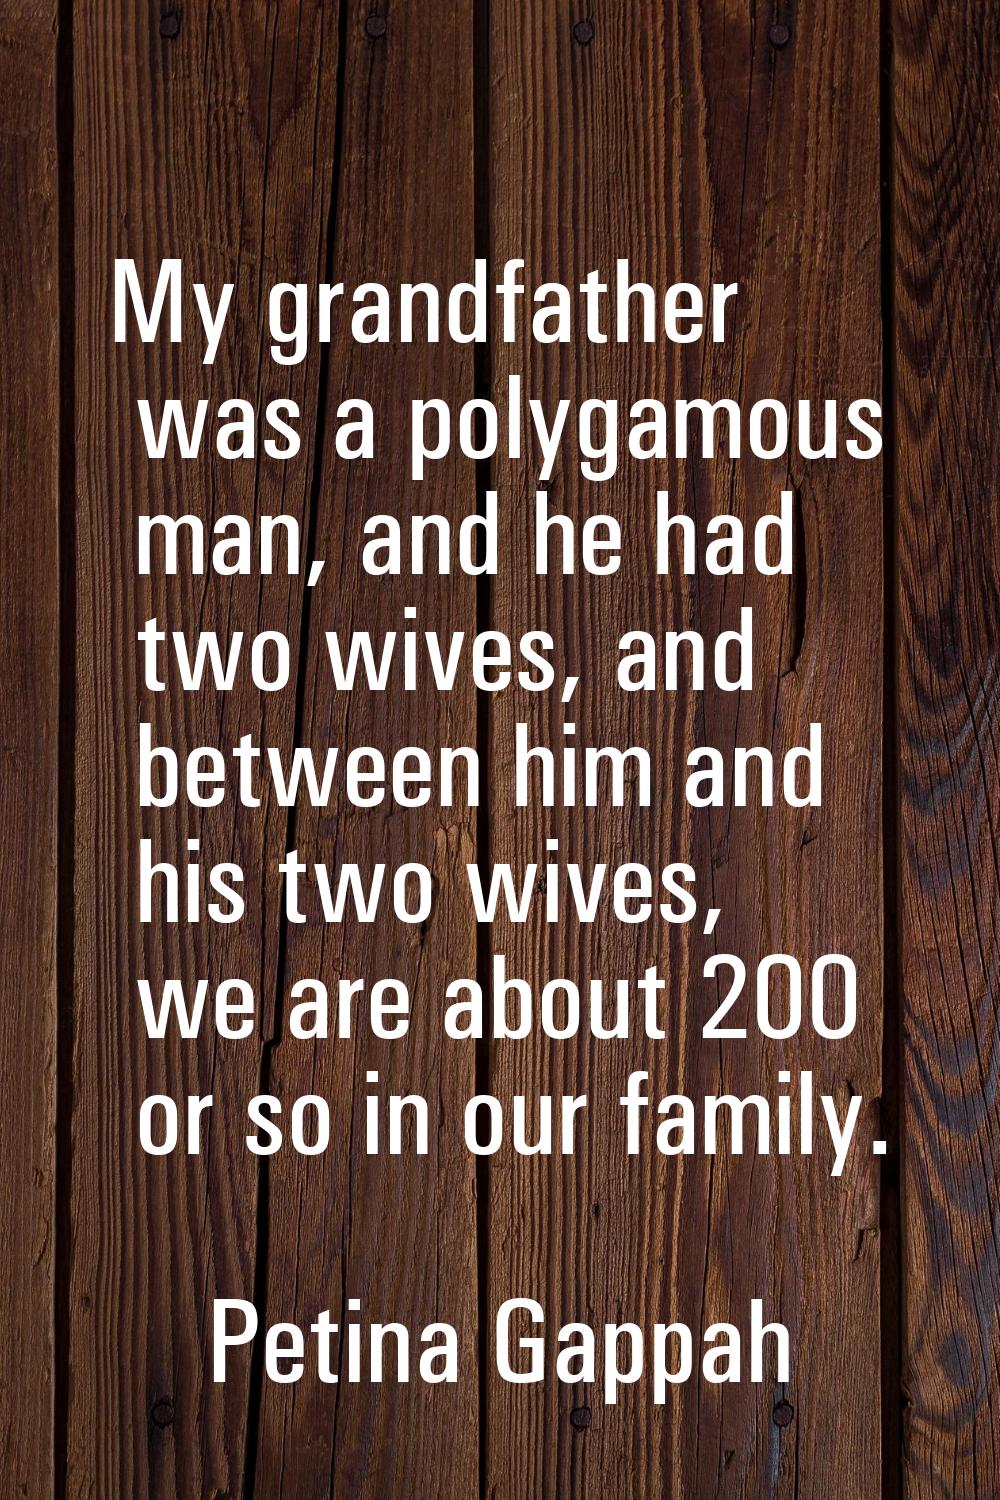 My grandfather was a polygamous man, and he had two wives, and between him and his two wives, we ar